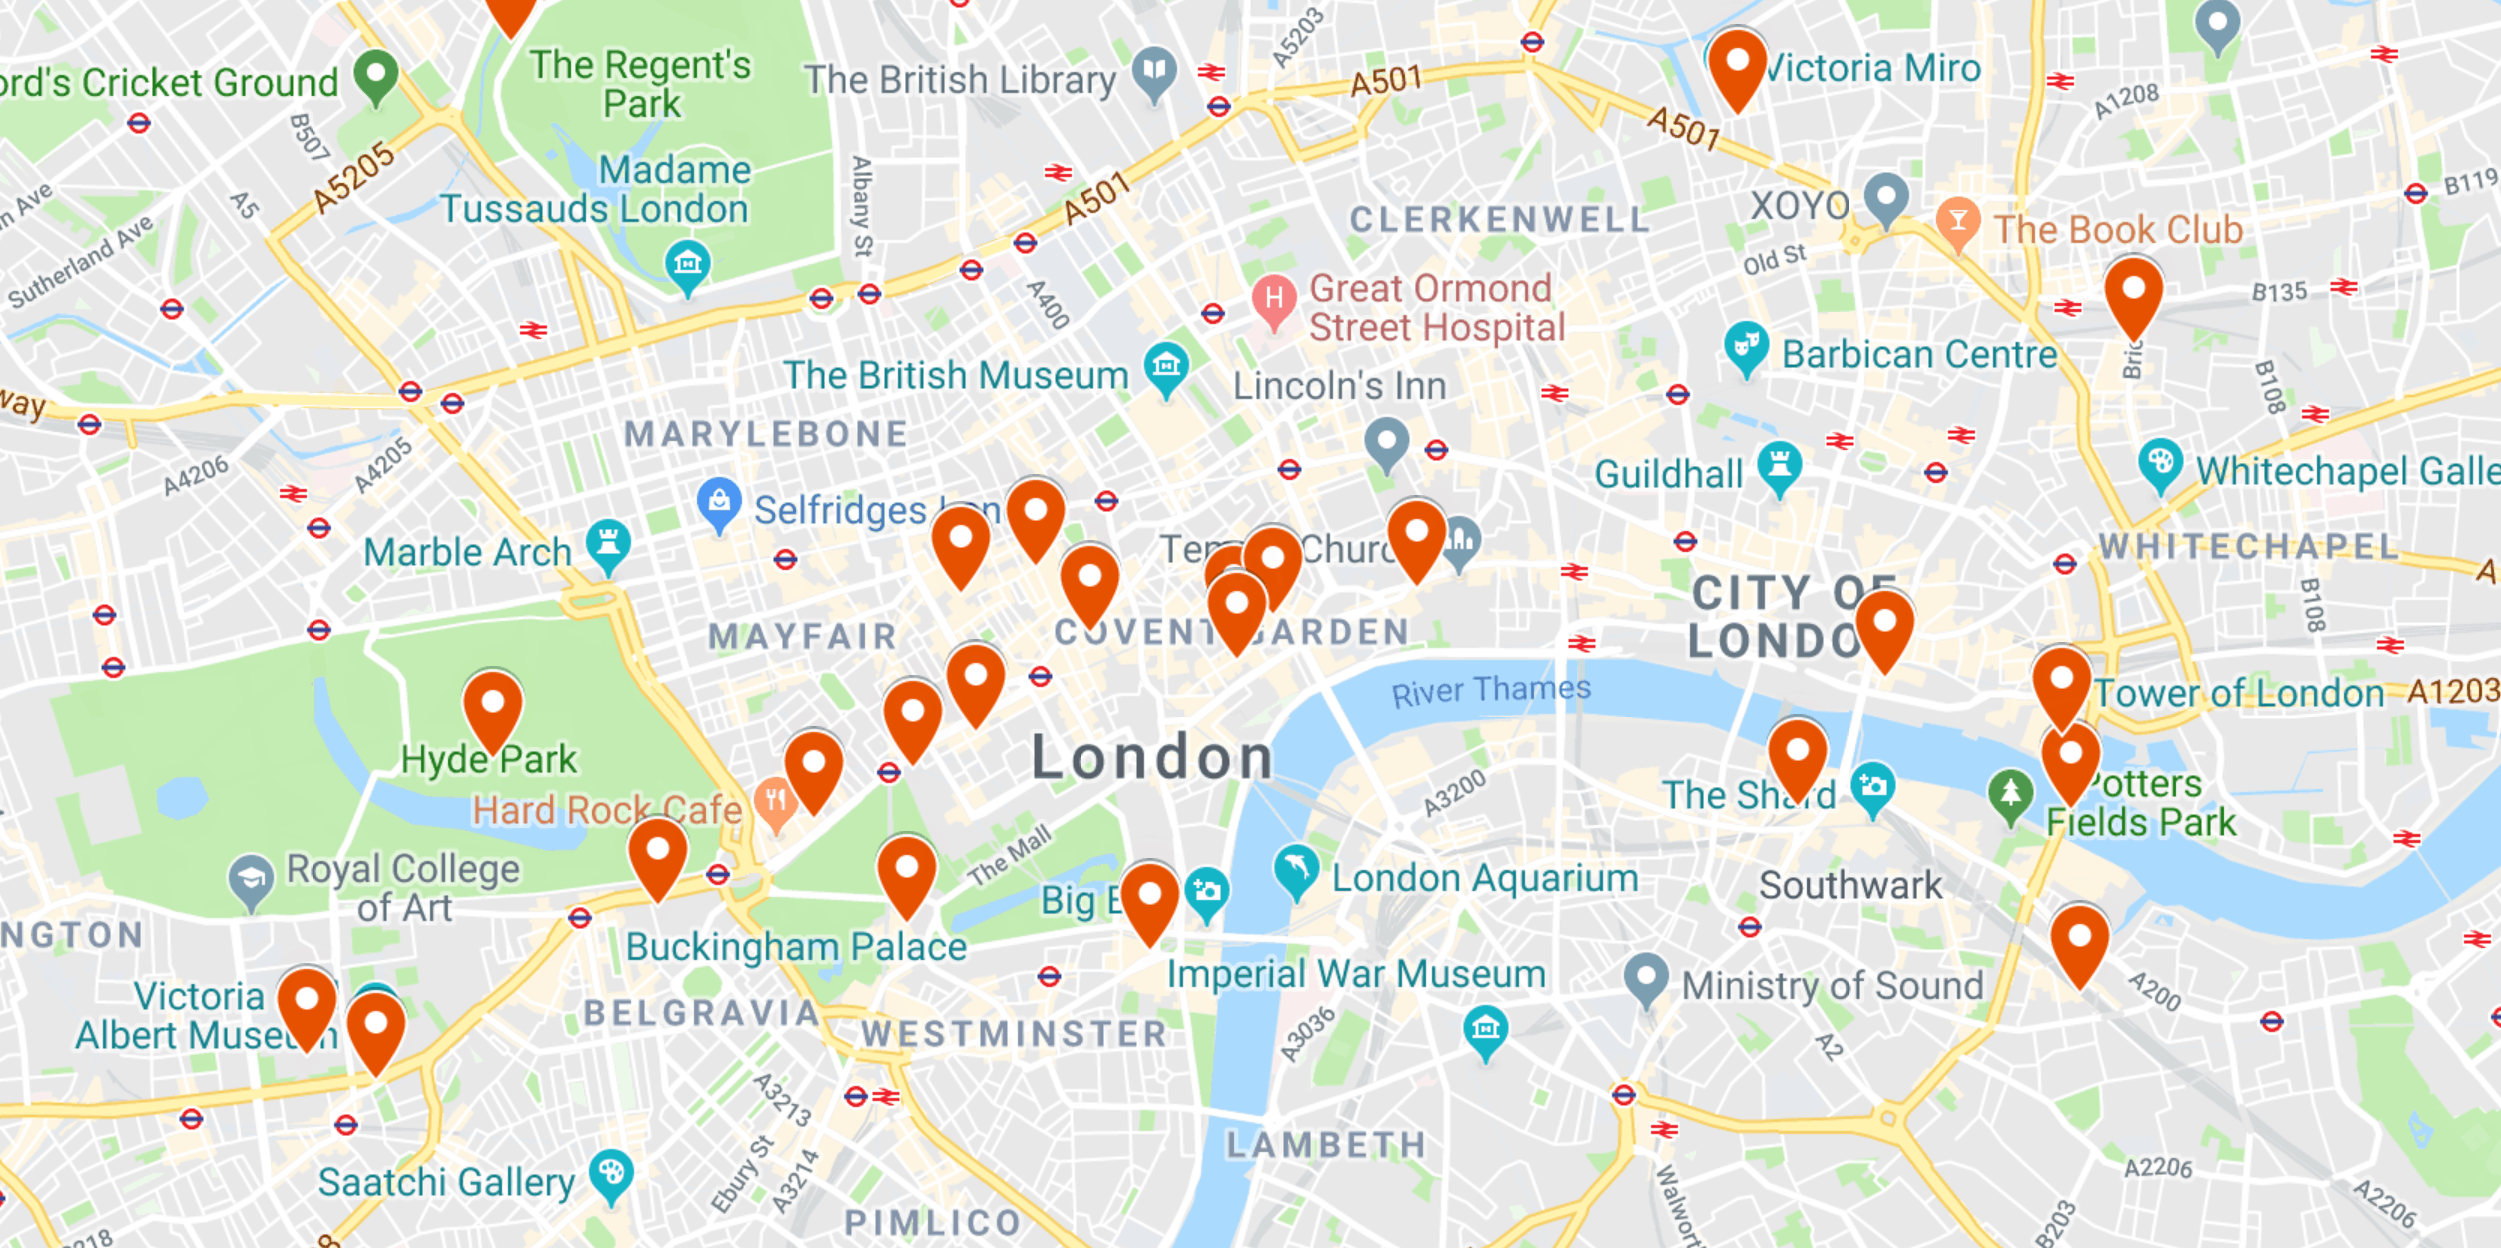 Map Of 4 Day London Itinerary things to see and do | 4 day London itinerary Map of attractions 